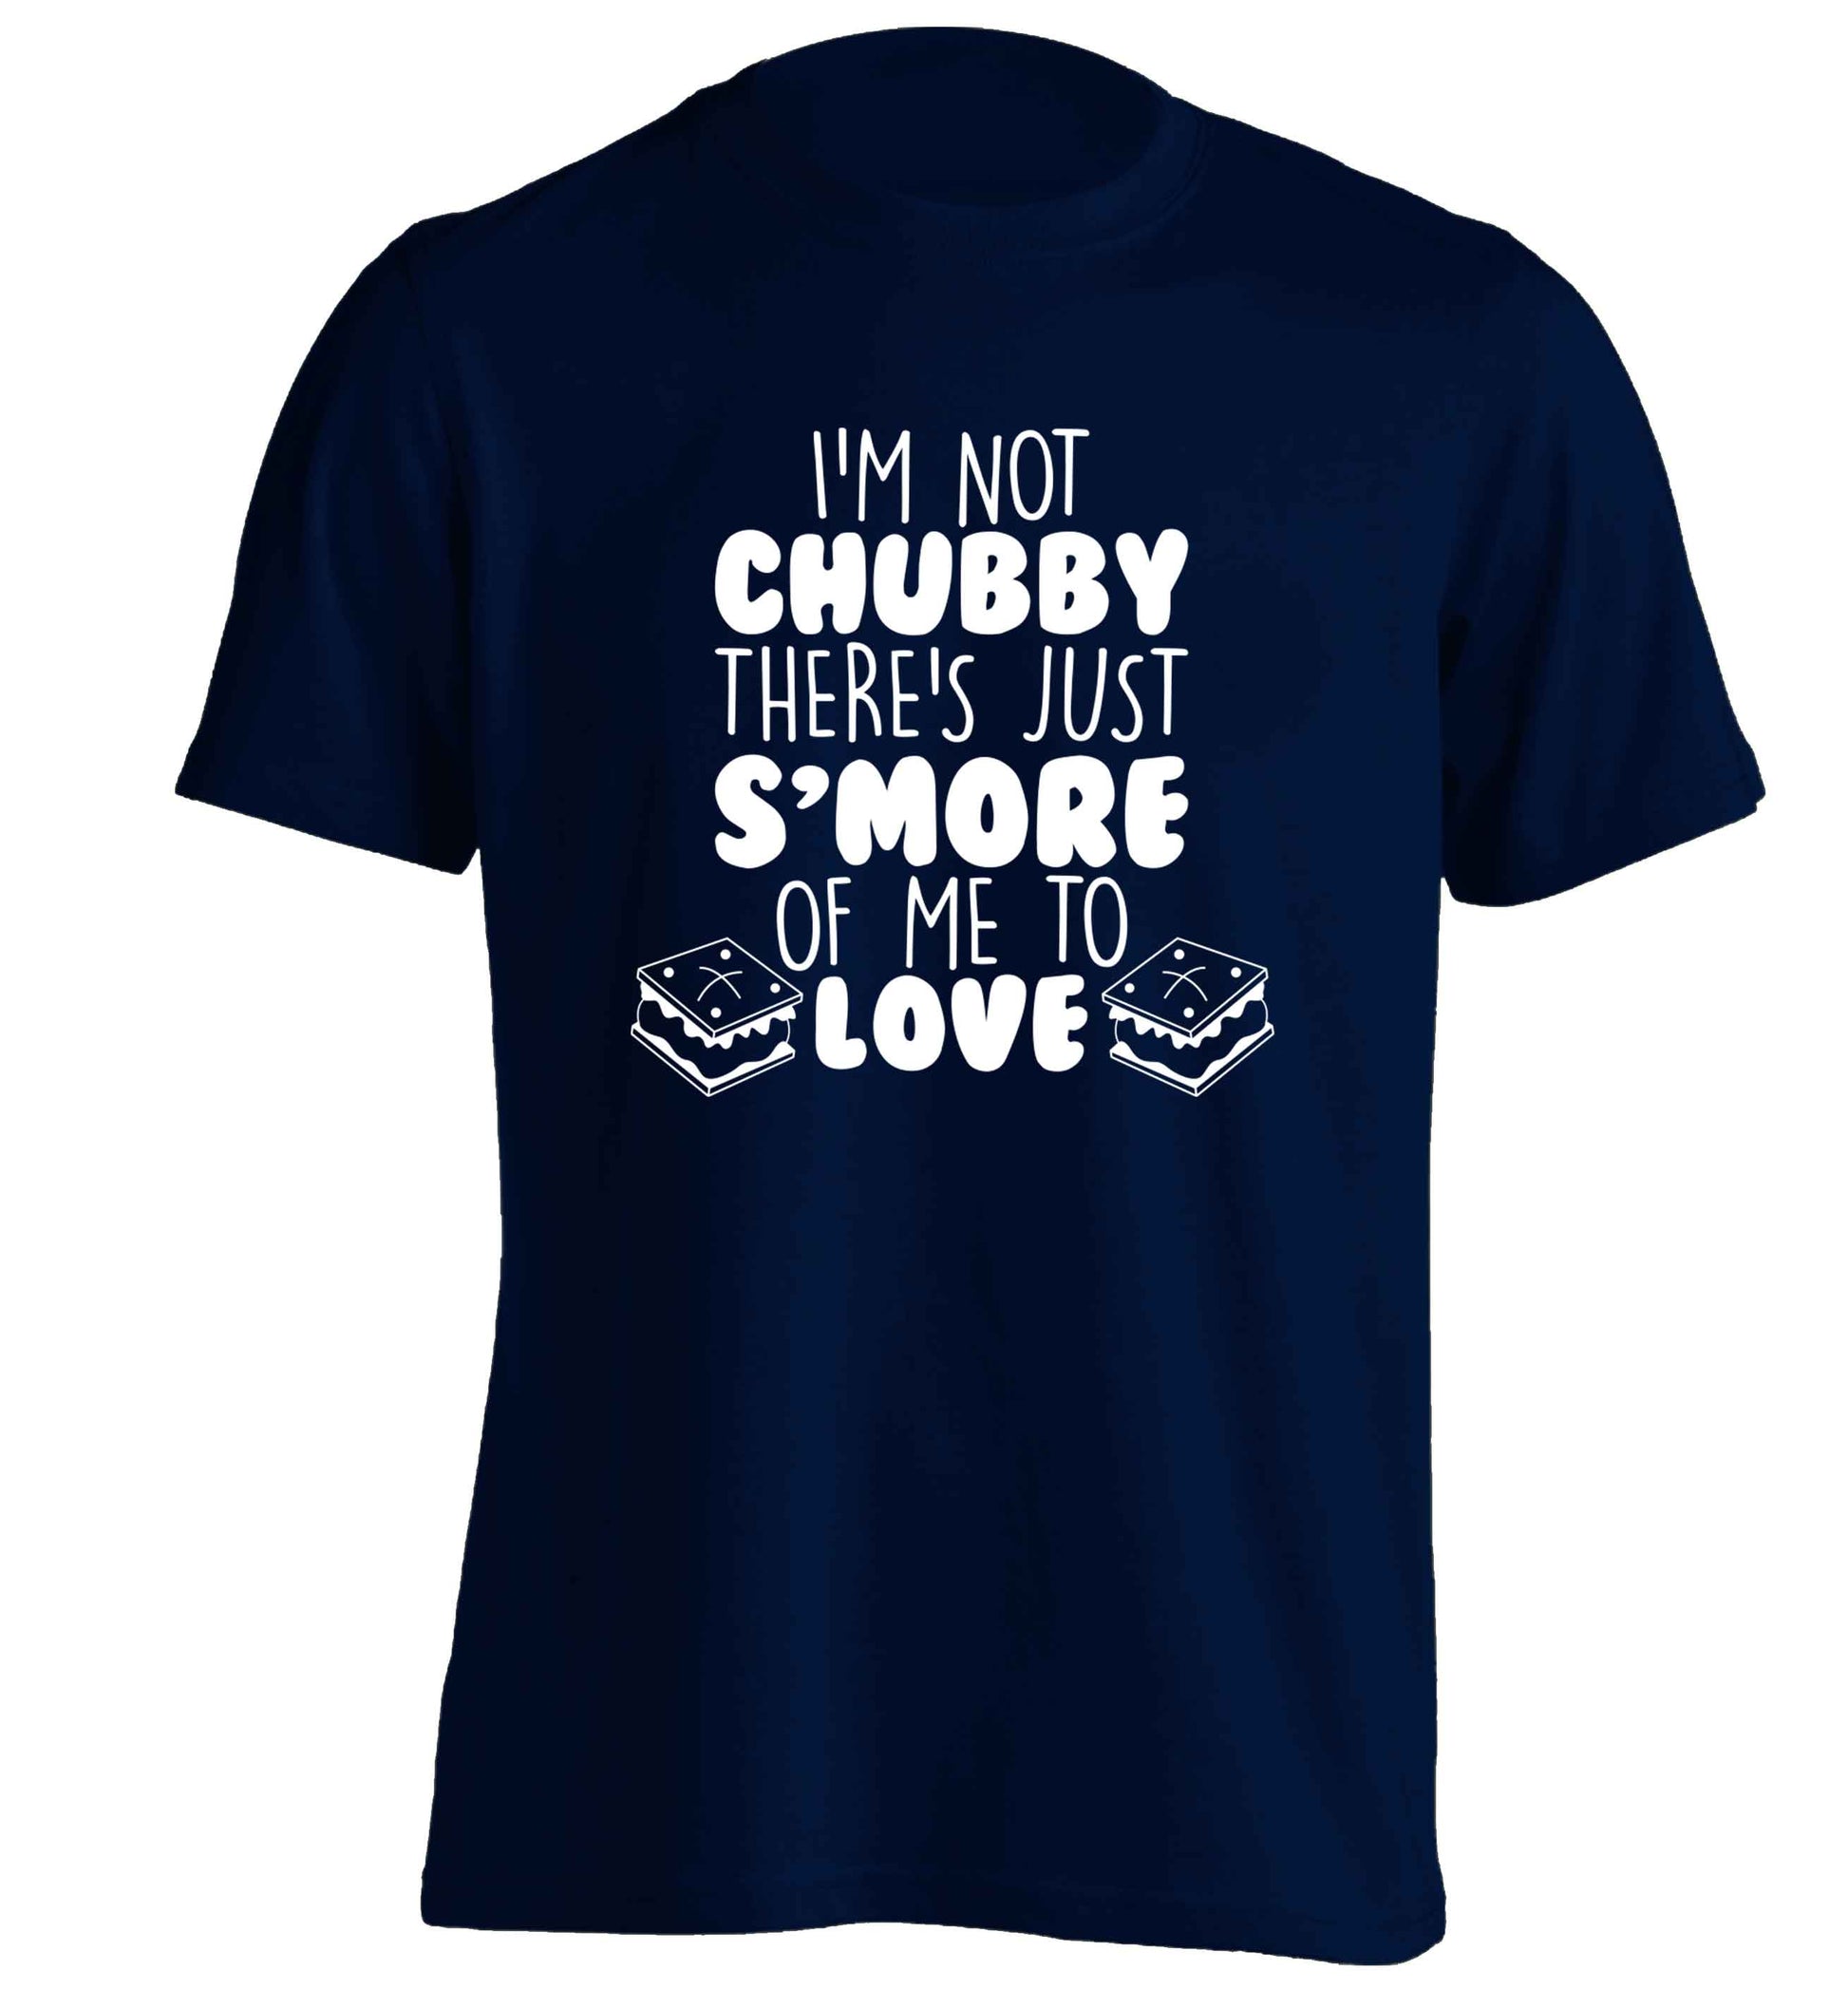 I'm not chubby there's just s'more of me to love adults unisex navy Tshirt 2XL